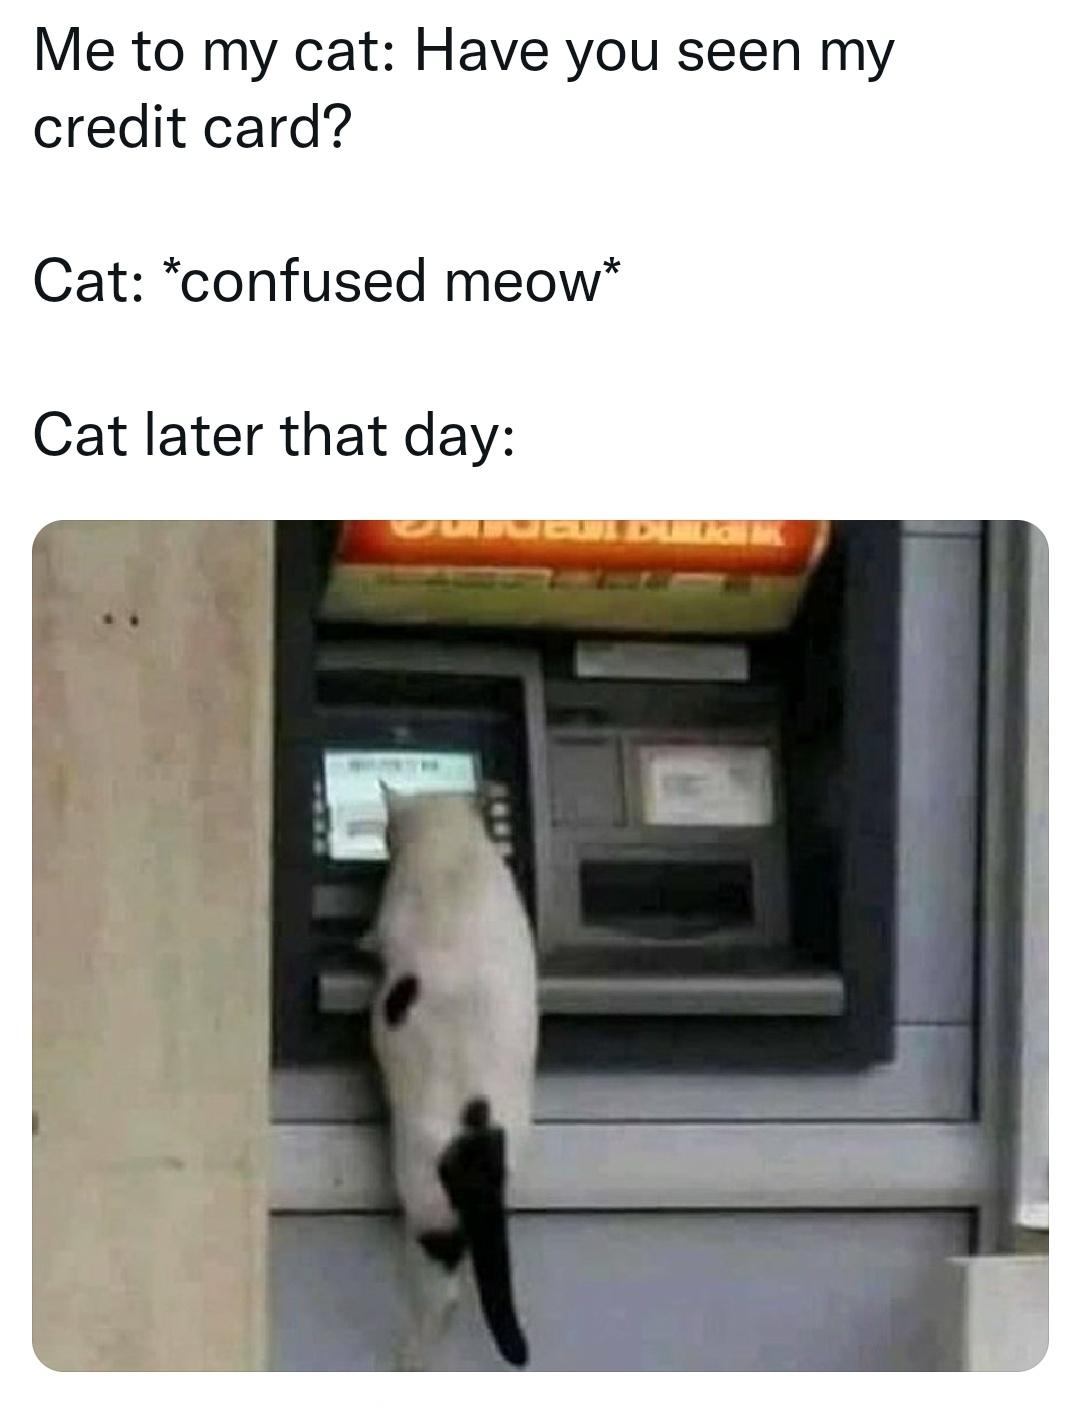 cat at the bank - Me to my cat Have you seen my credit card? Cat confused meow Cat later that day